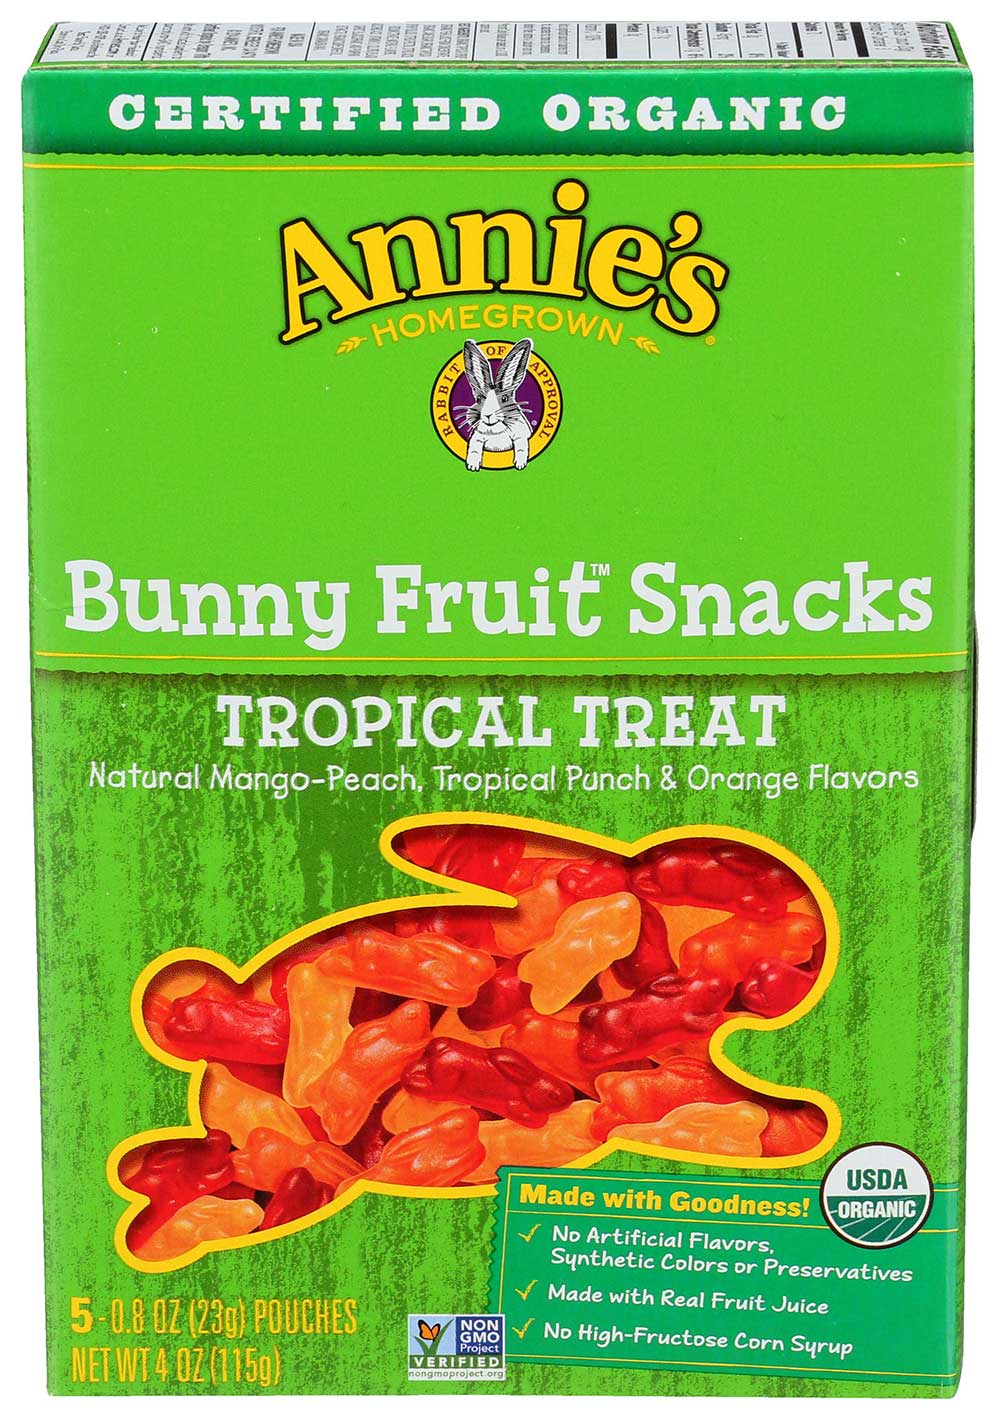 Annies Homegrown Organic Tropical Treat Bunny Fruit Snacks -- 10 Per Case